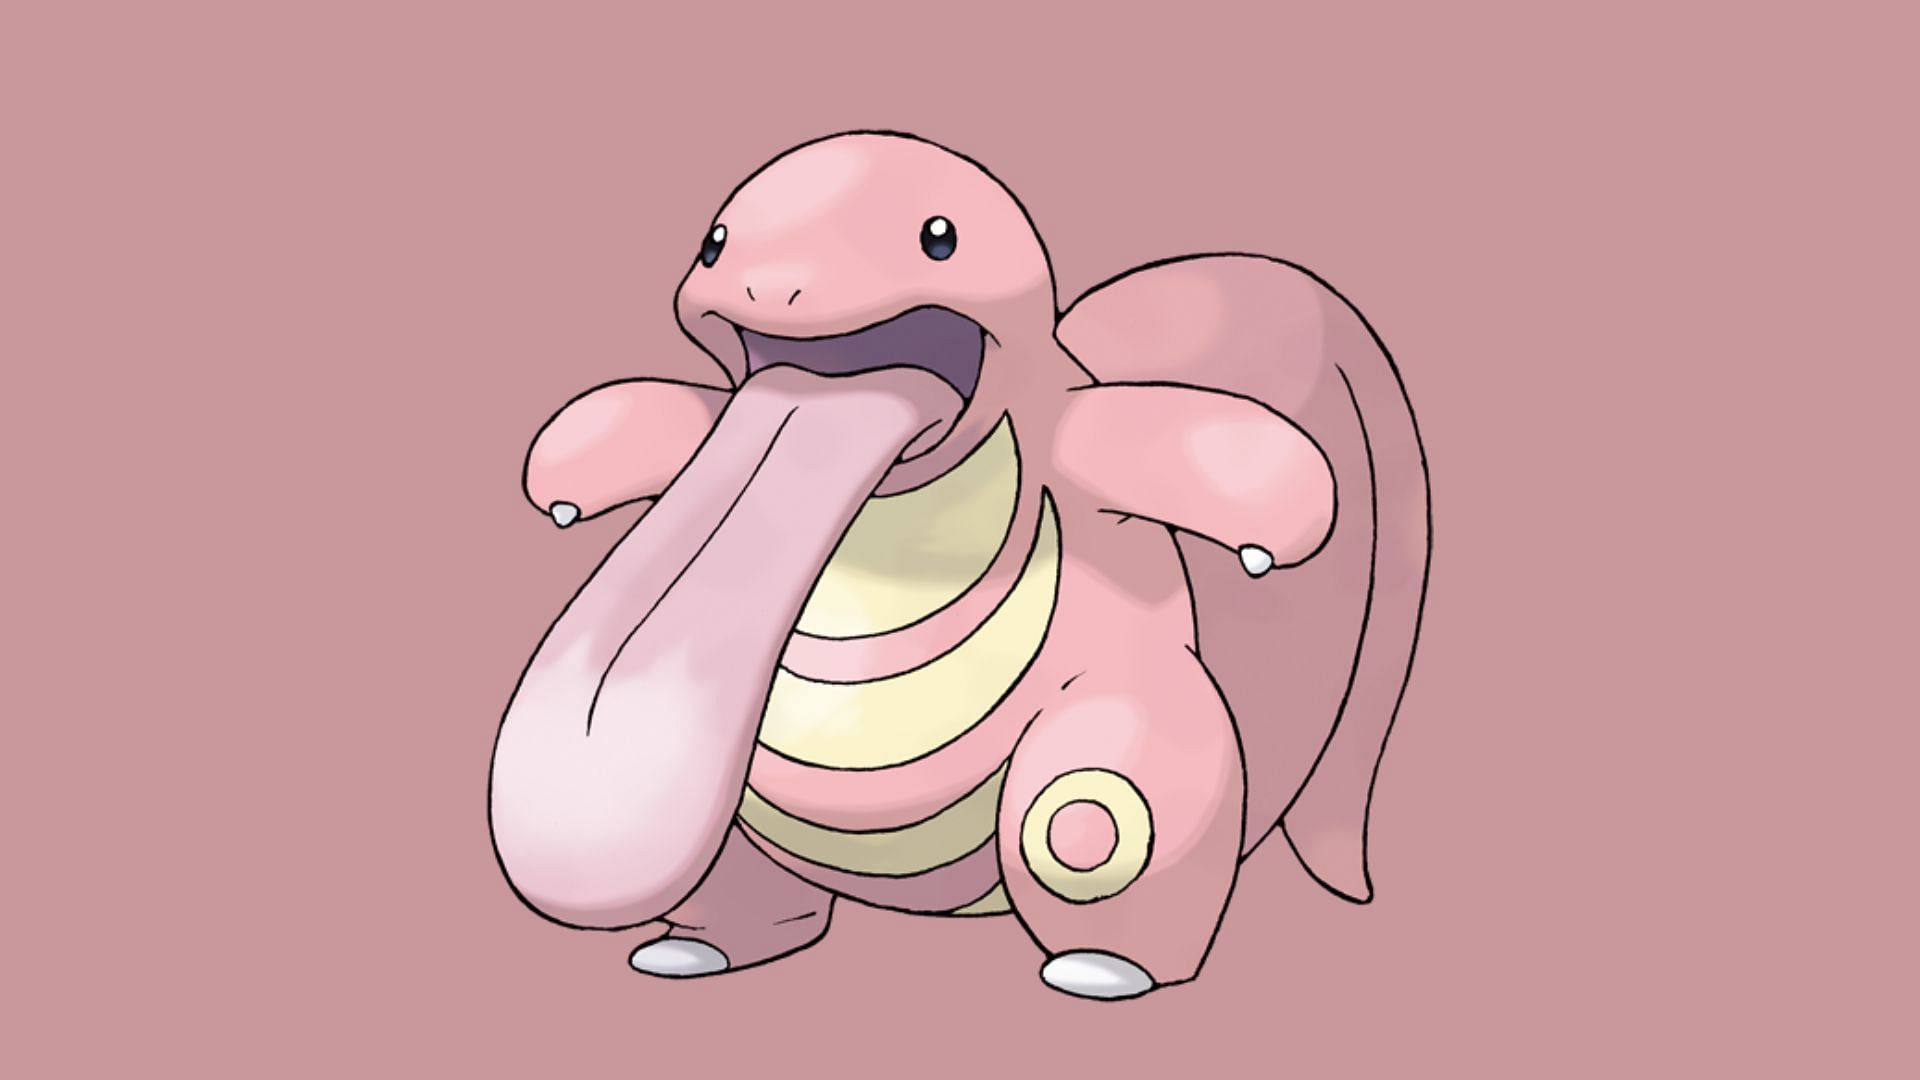 Defeat Lickitung in Pokemon GO